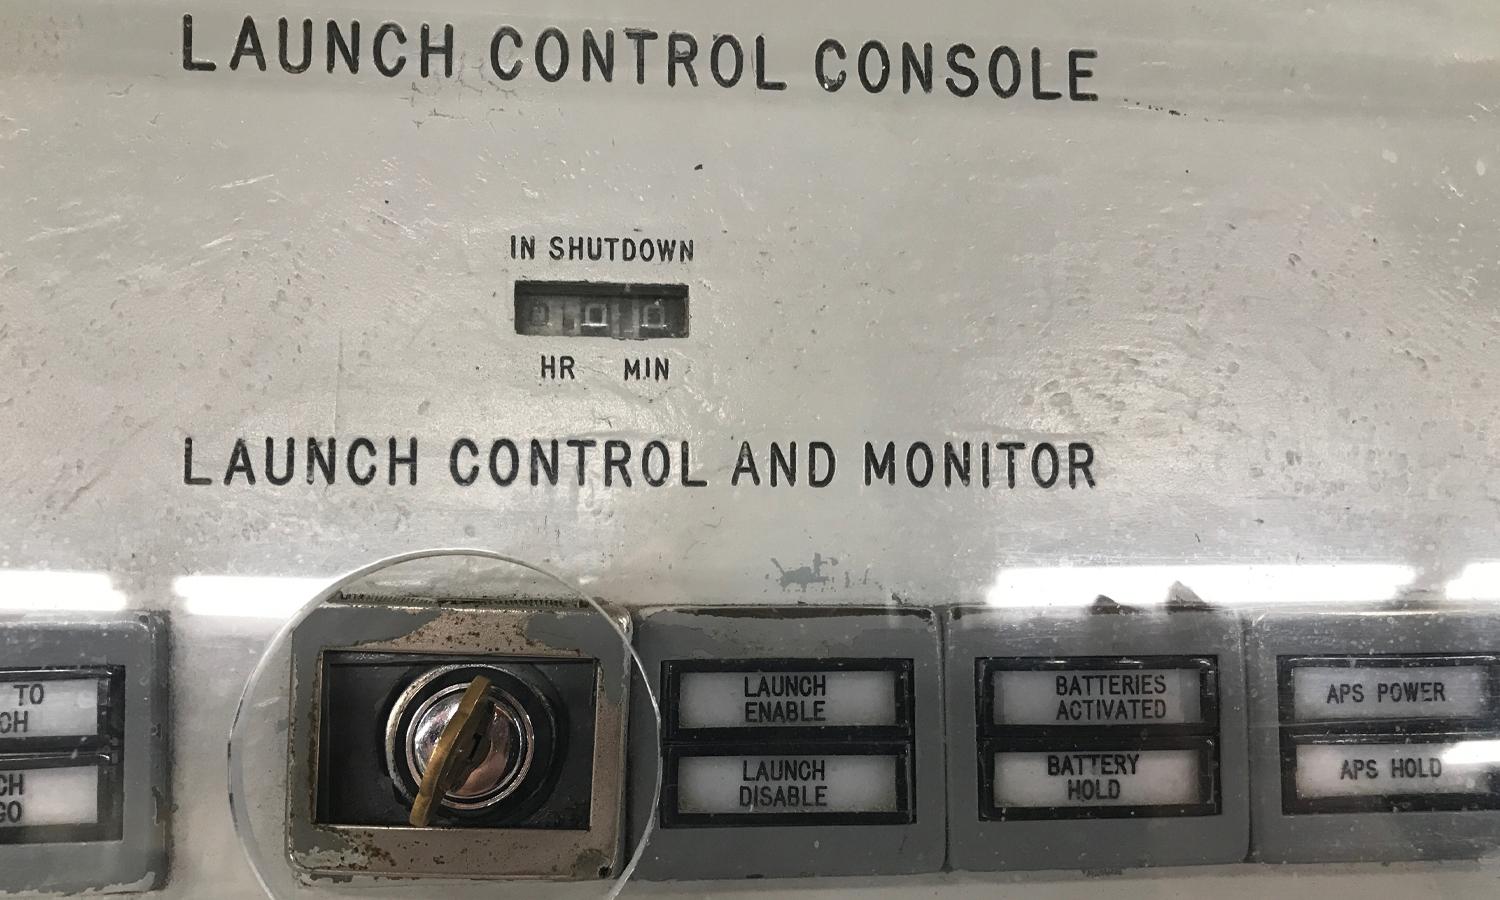 Nuclear launch control console.